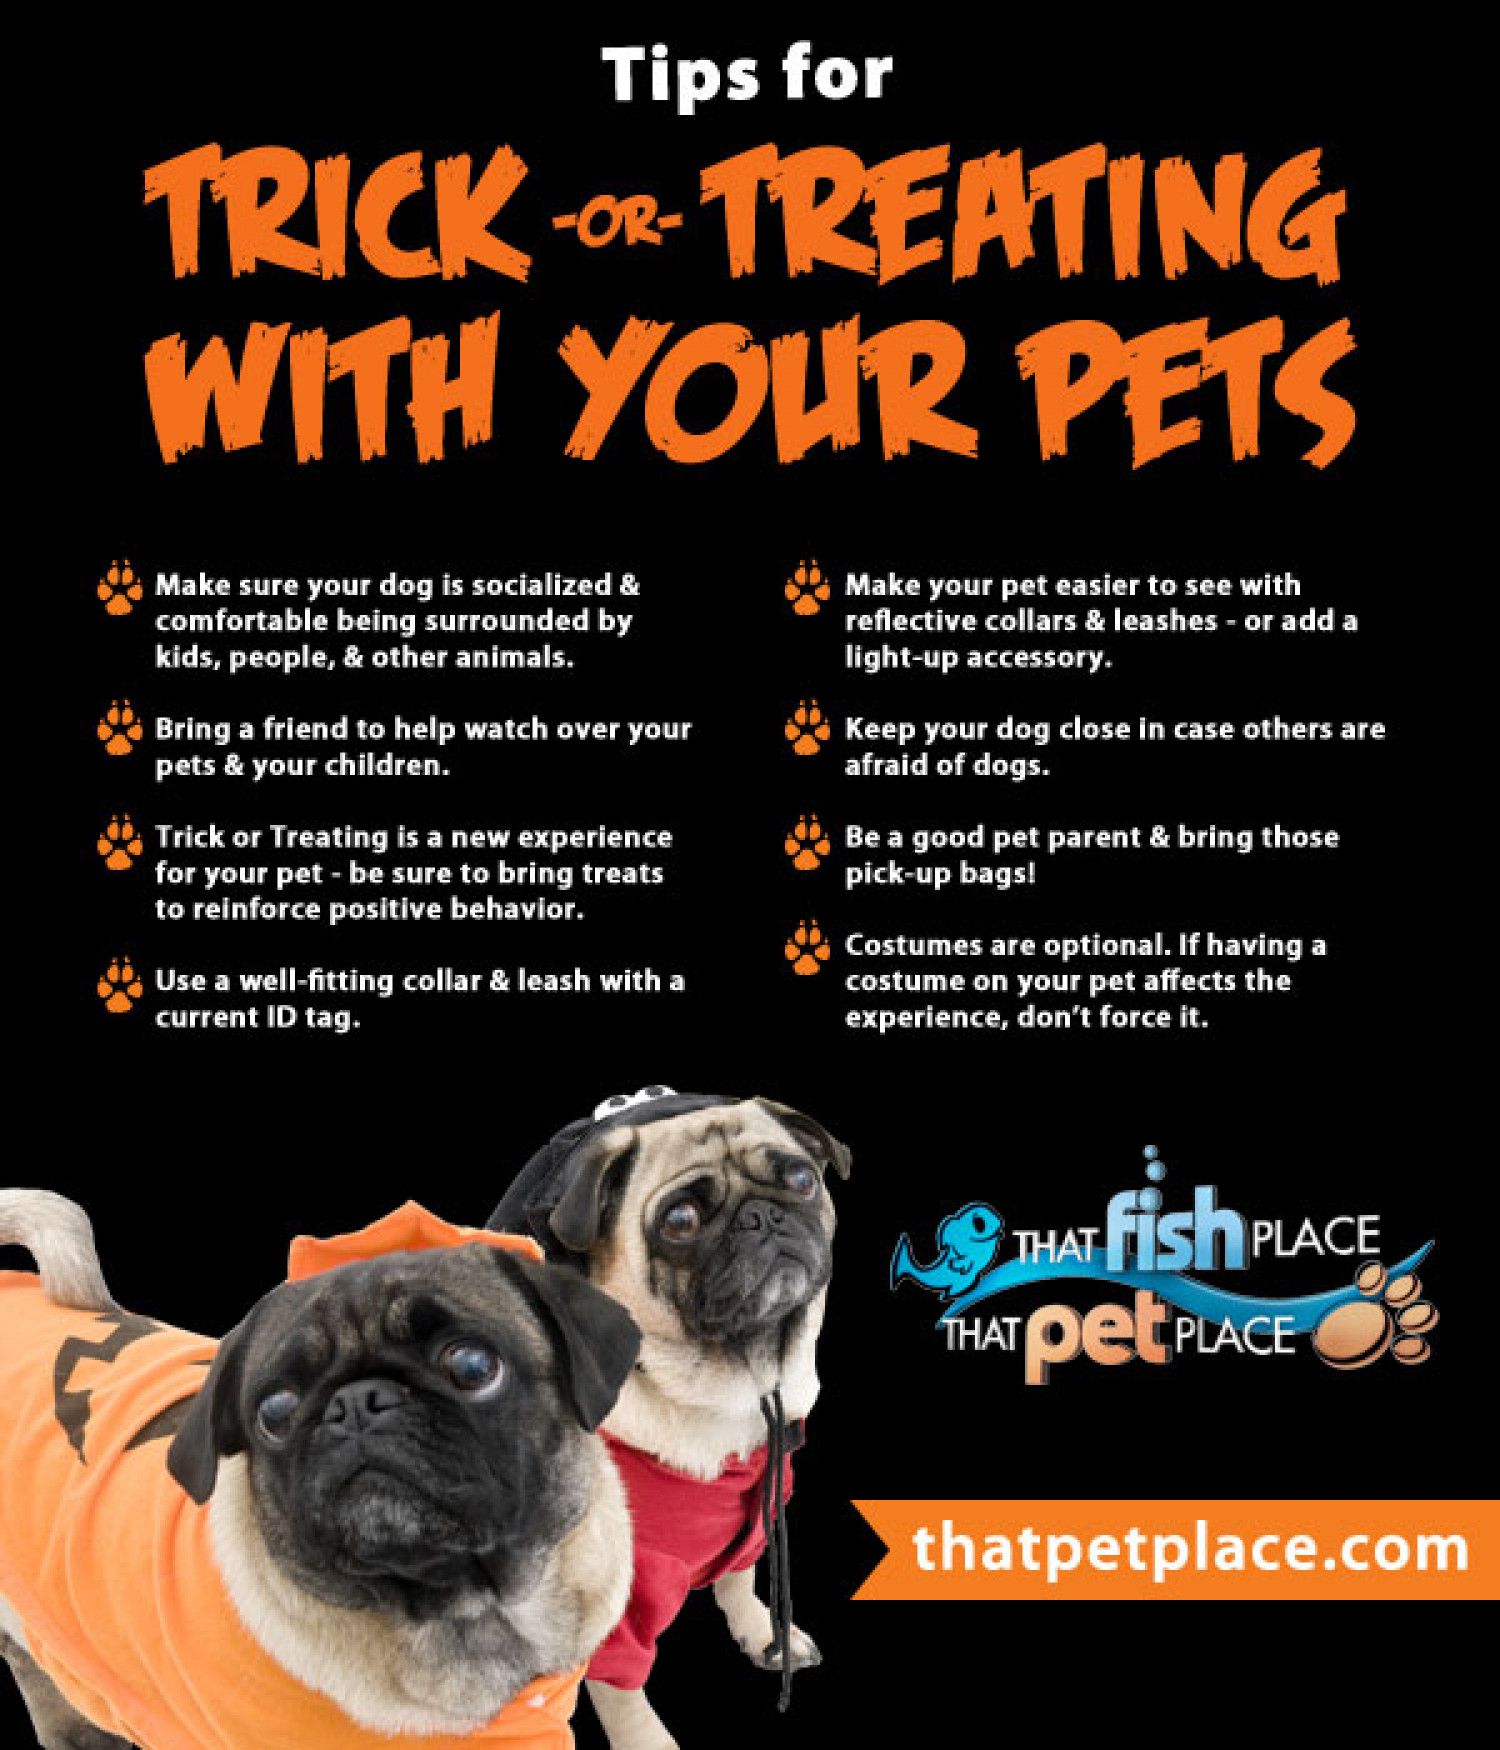 Tips for Trick or Treating With Your Pets Infographic